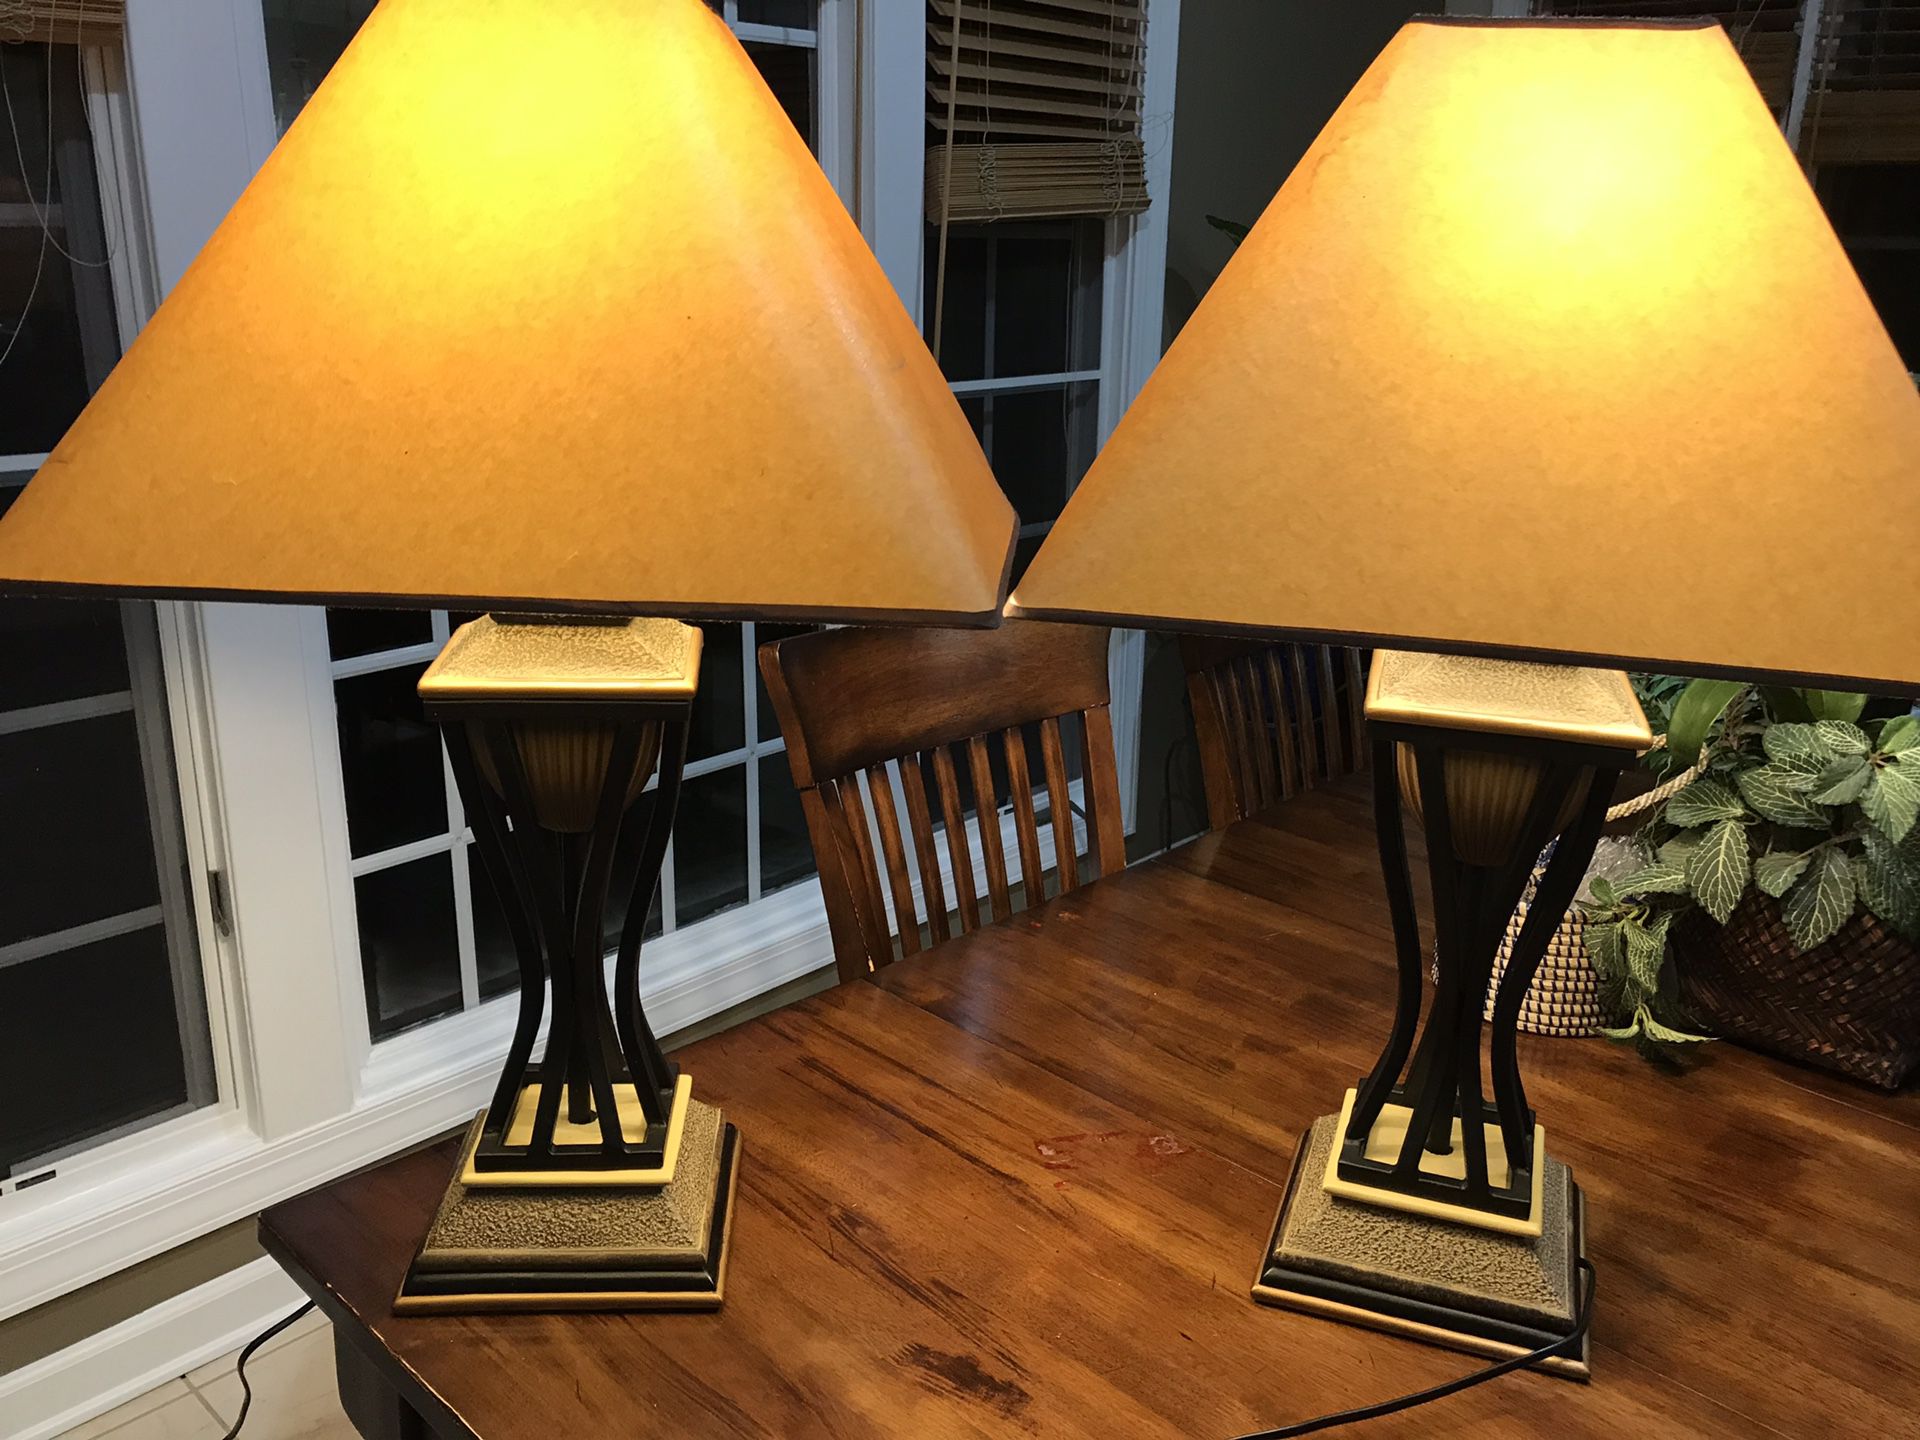 Lamps (pair of lamps with shades)